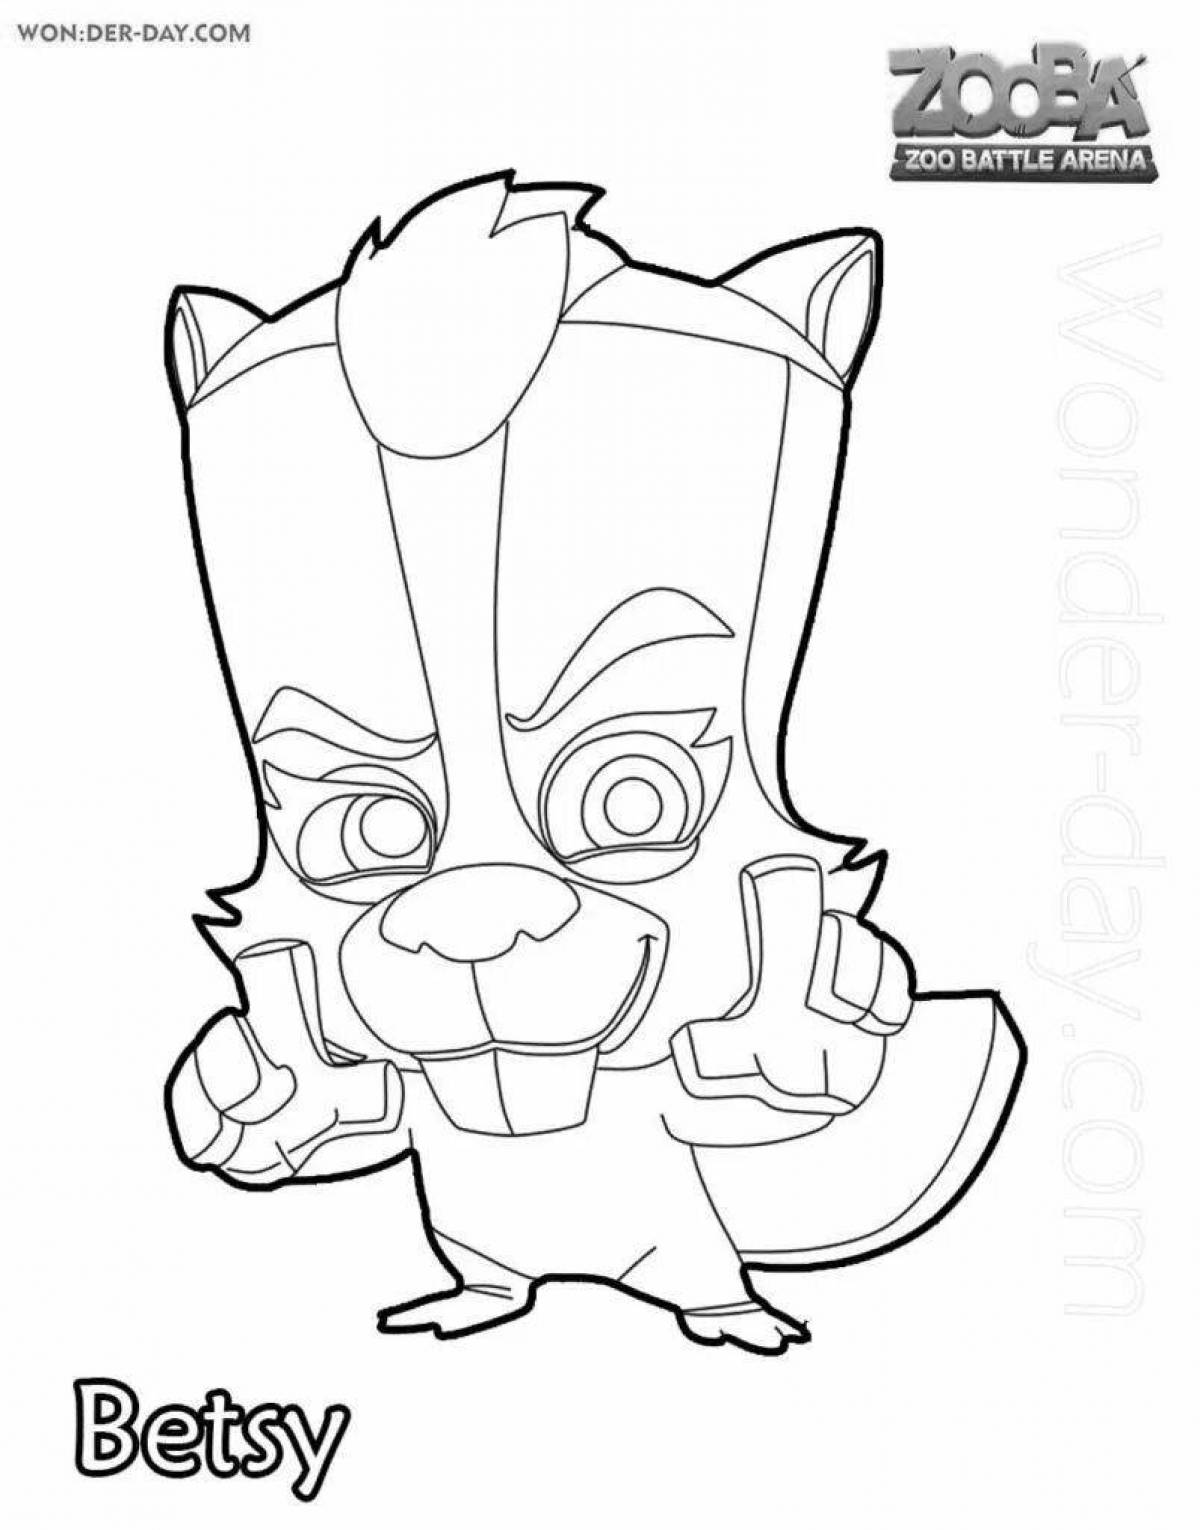 Playful teeth coloring page